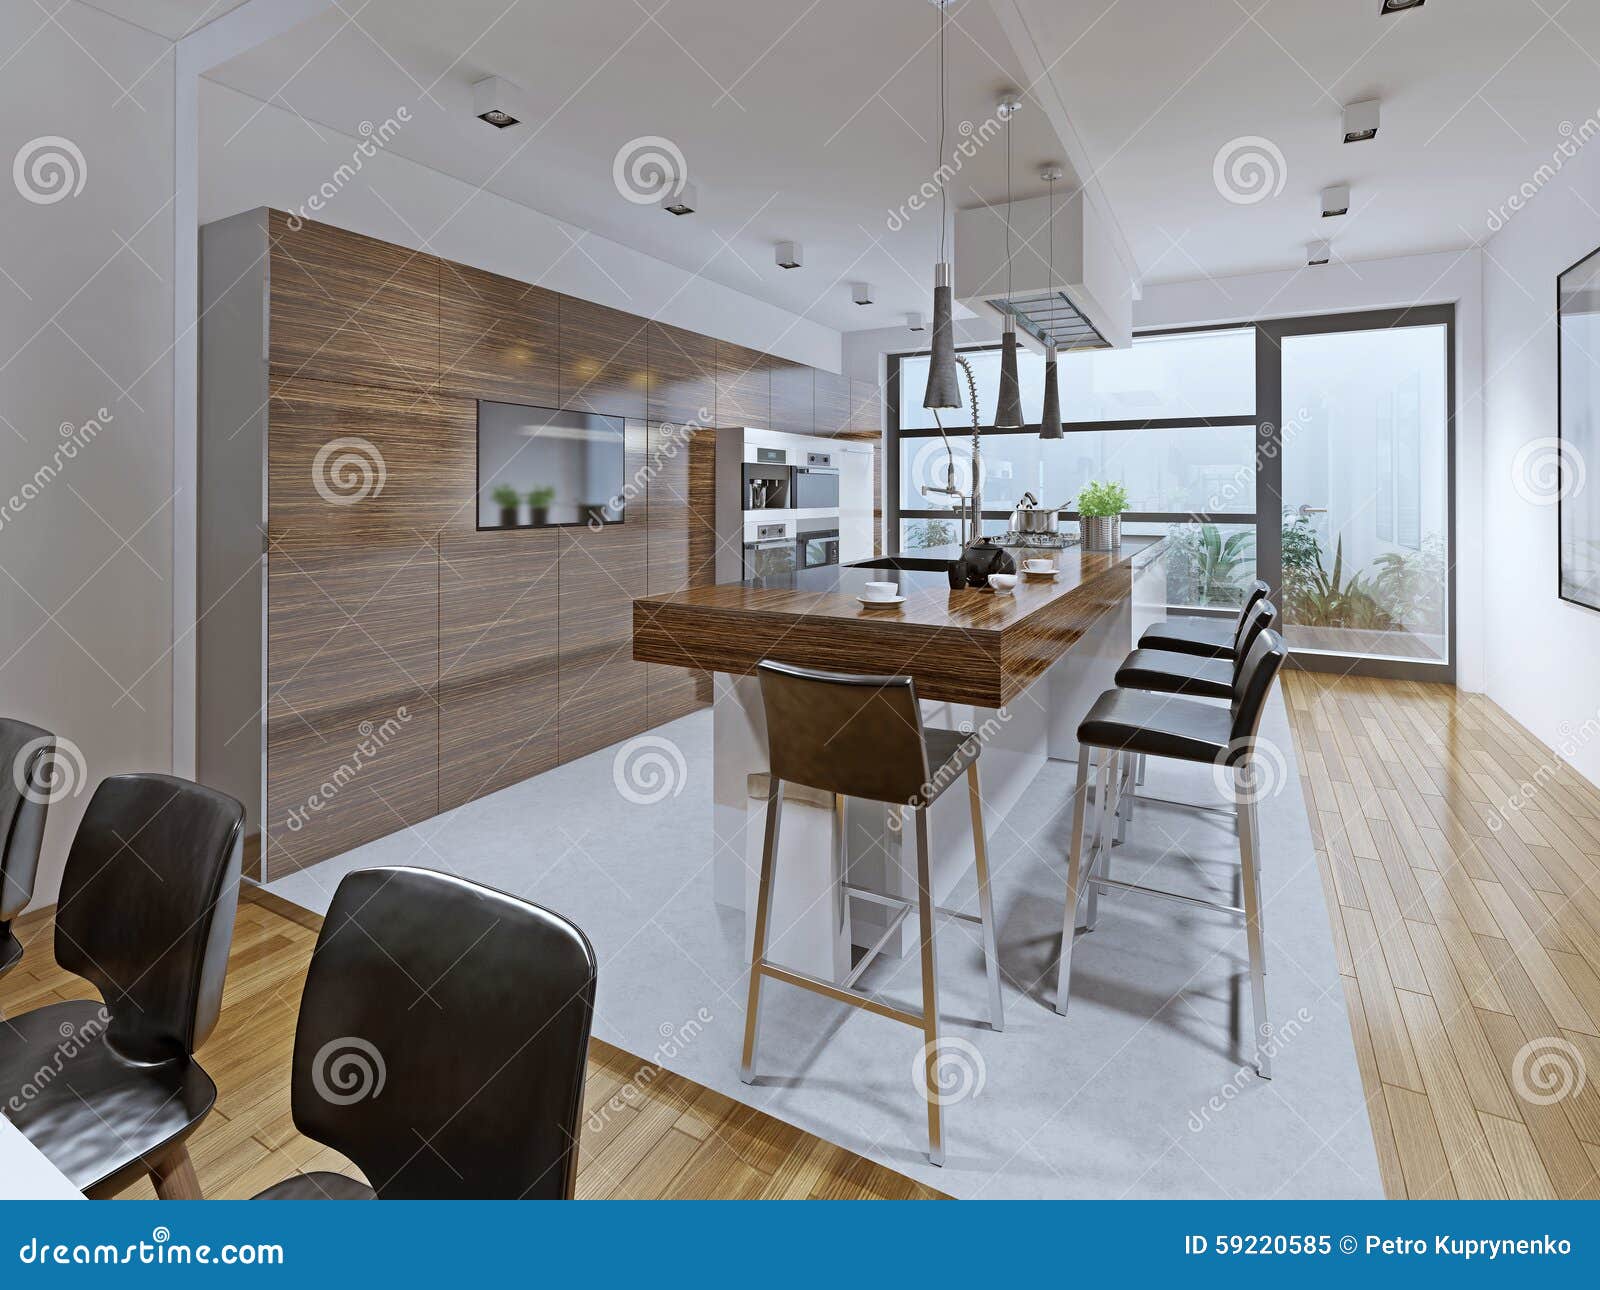 Kitchen High Tech Style Stock Image Image Of Contemporary